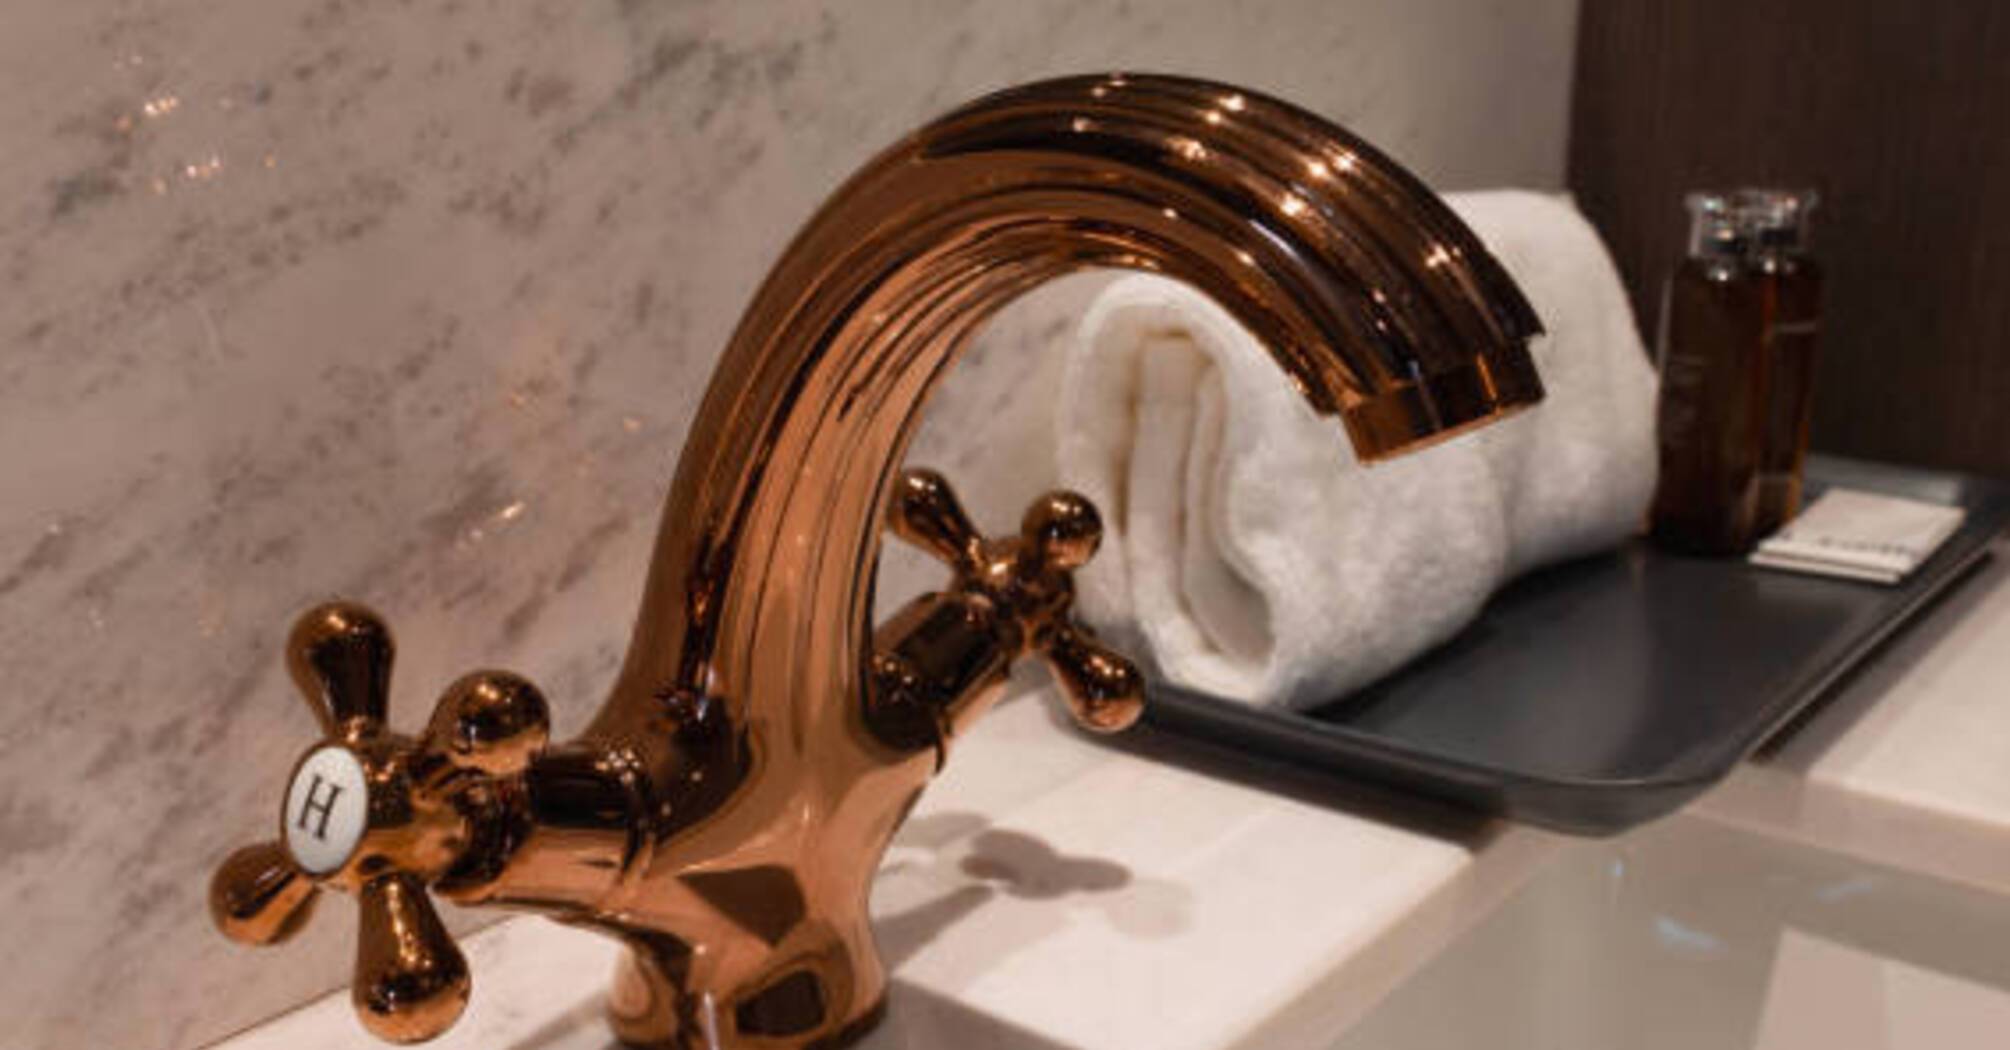 Plumbing of golden color: Advantages and disadvantages to consider